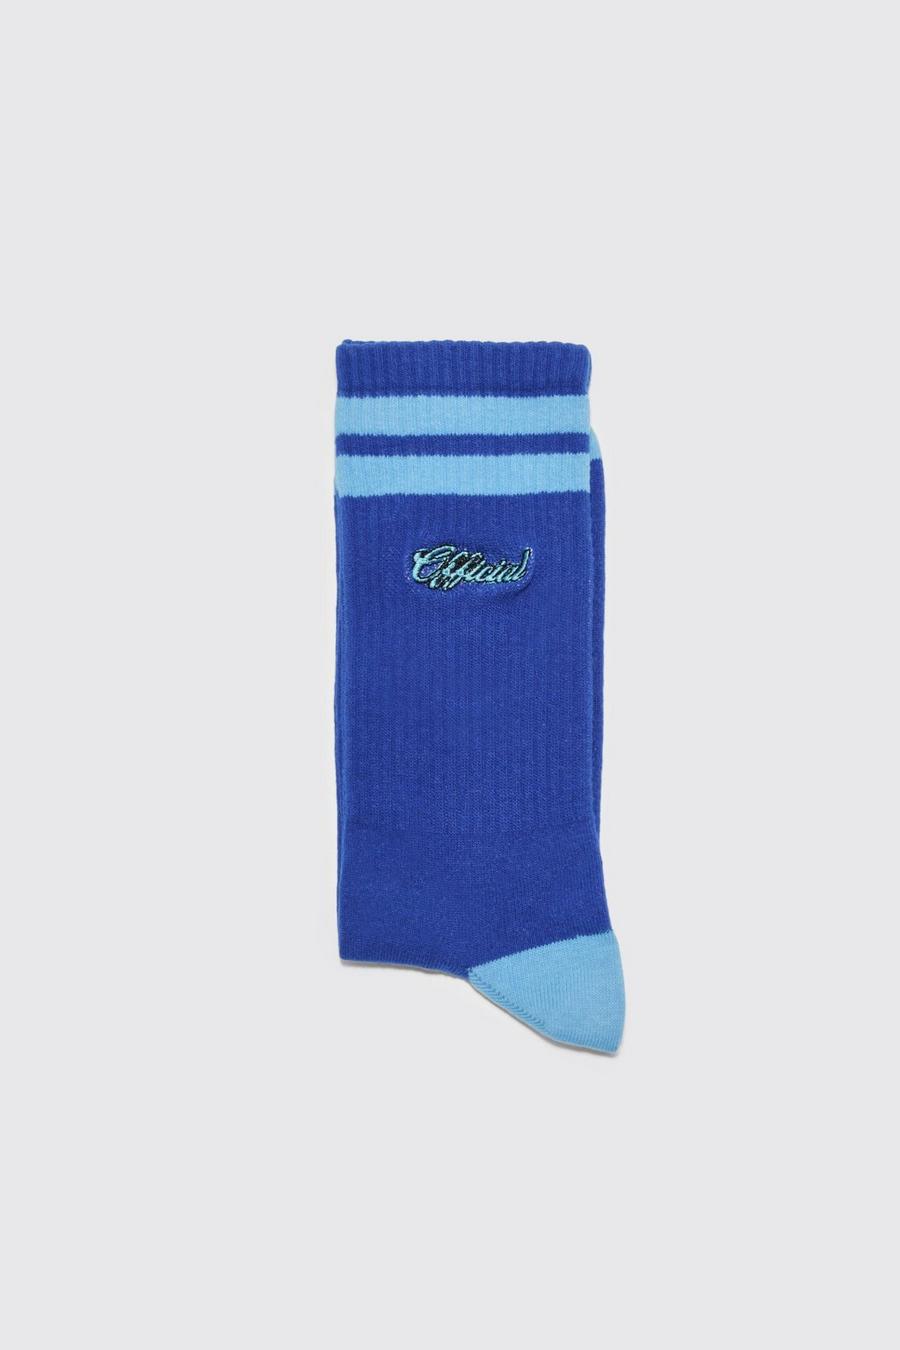 Official Embroidered Sports Stripe Socks, Navy blu oltremare